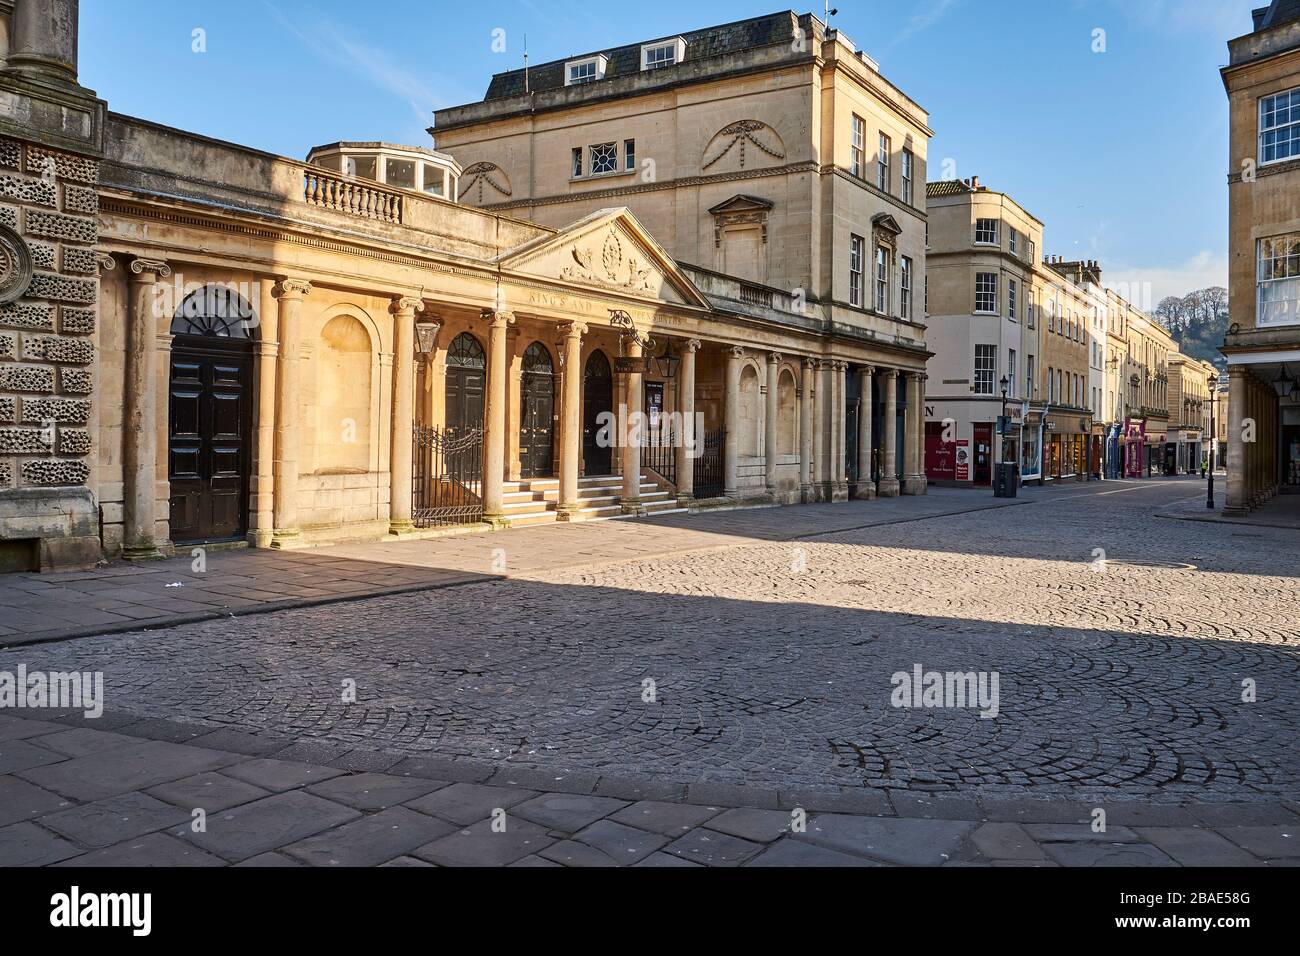 Bath, Somerset, England - March 26, 2020: The tourist city of Bath is deserted during the Coronavirus outbreak. The Royal Baths and Southgate Stock Photo